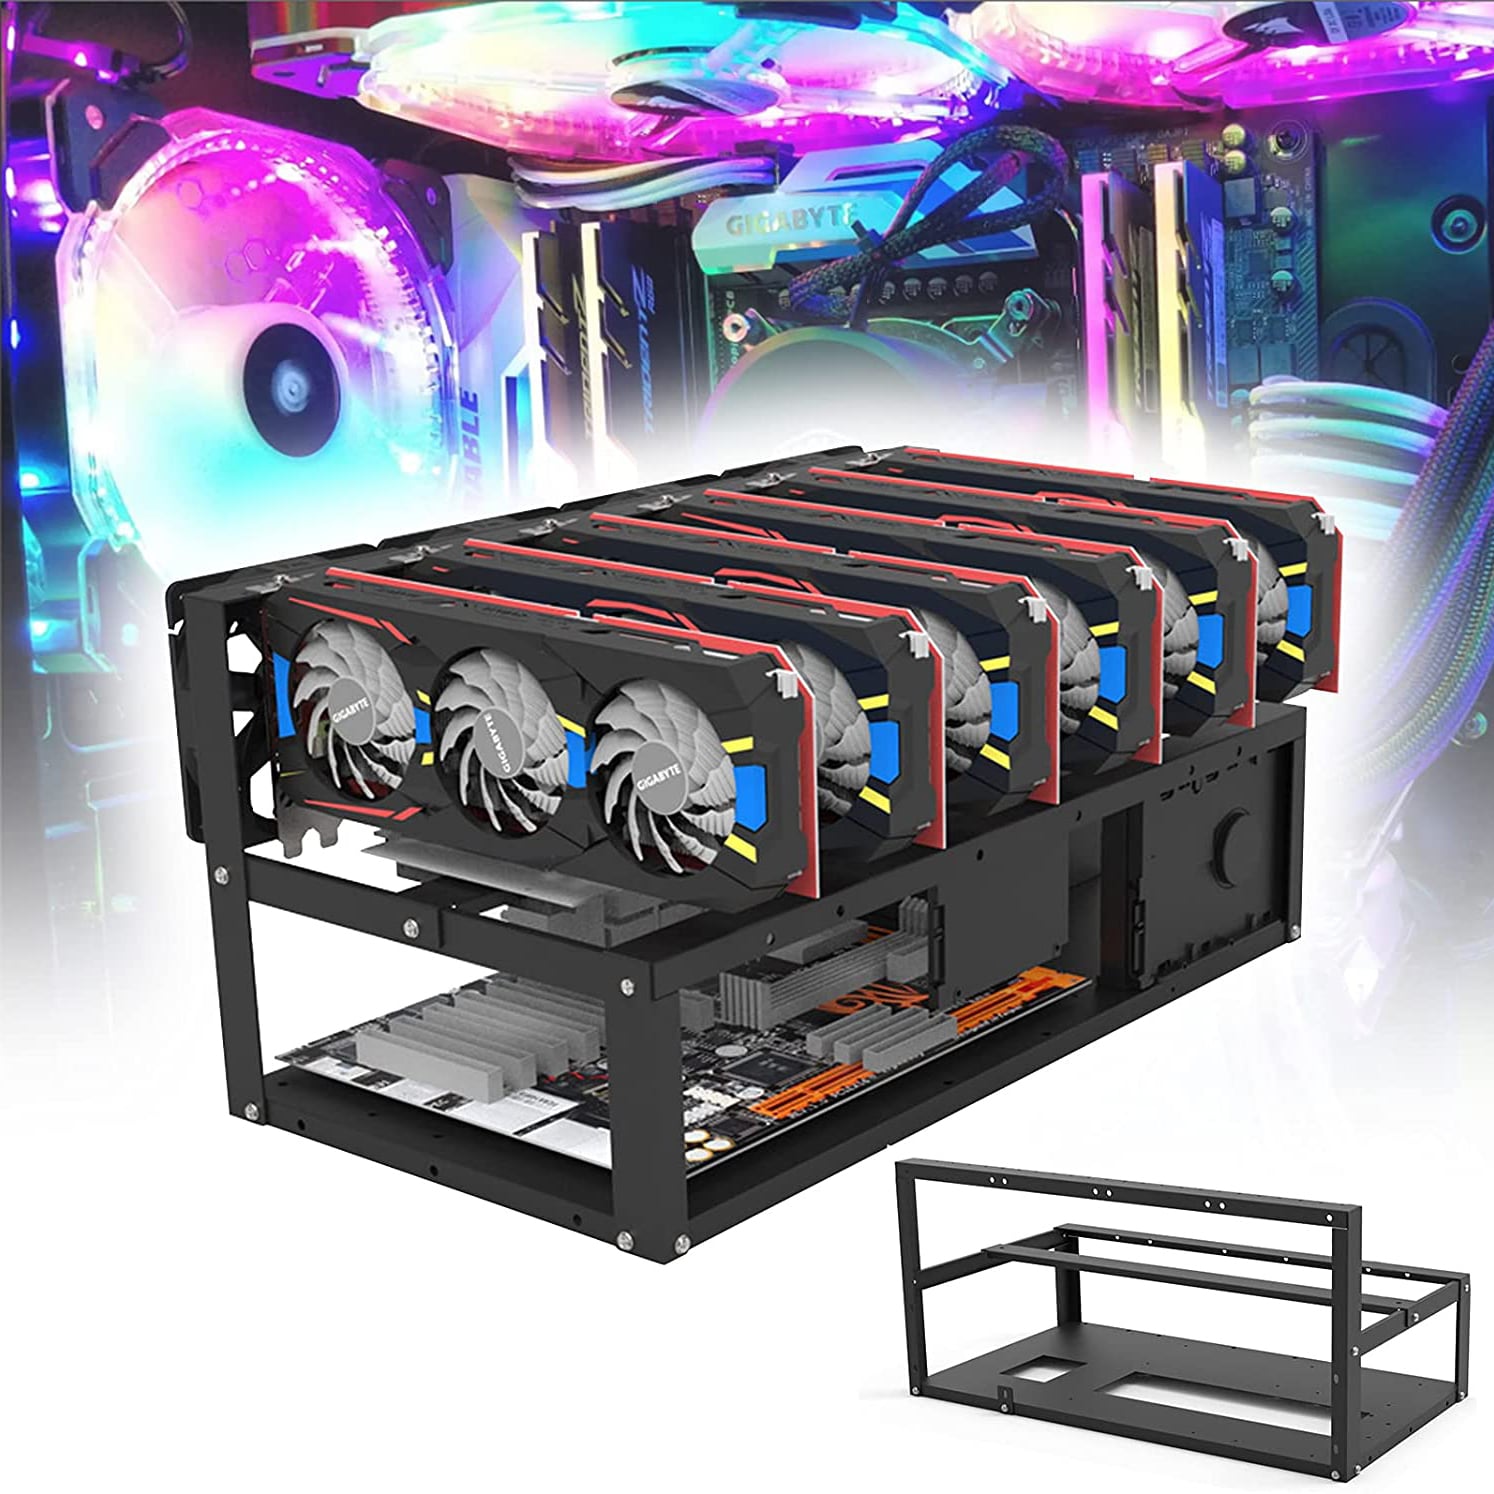 Top 10 Best Mining Rigs in 2021 Reviews Buying Guide